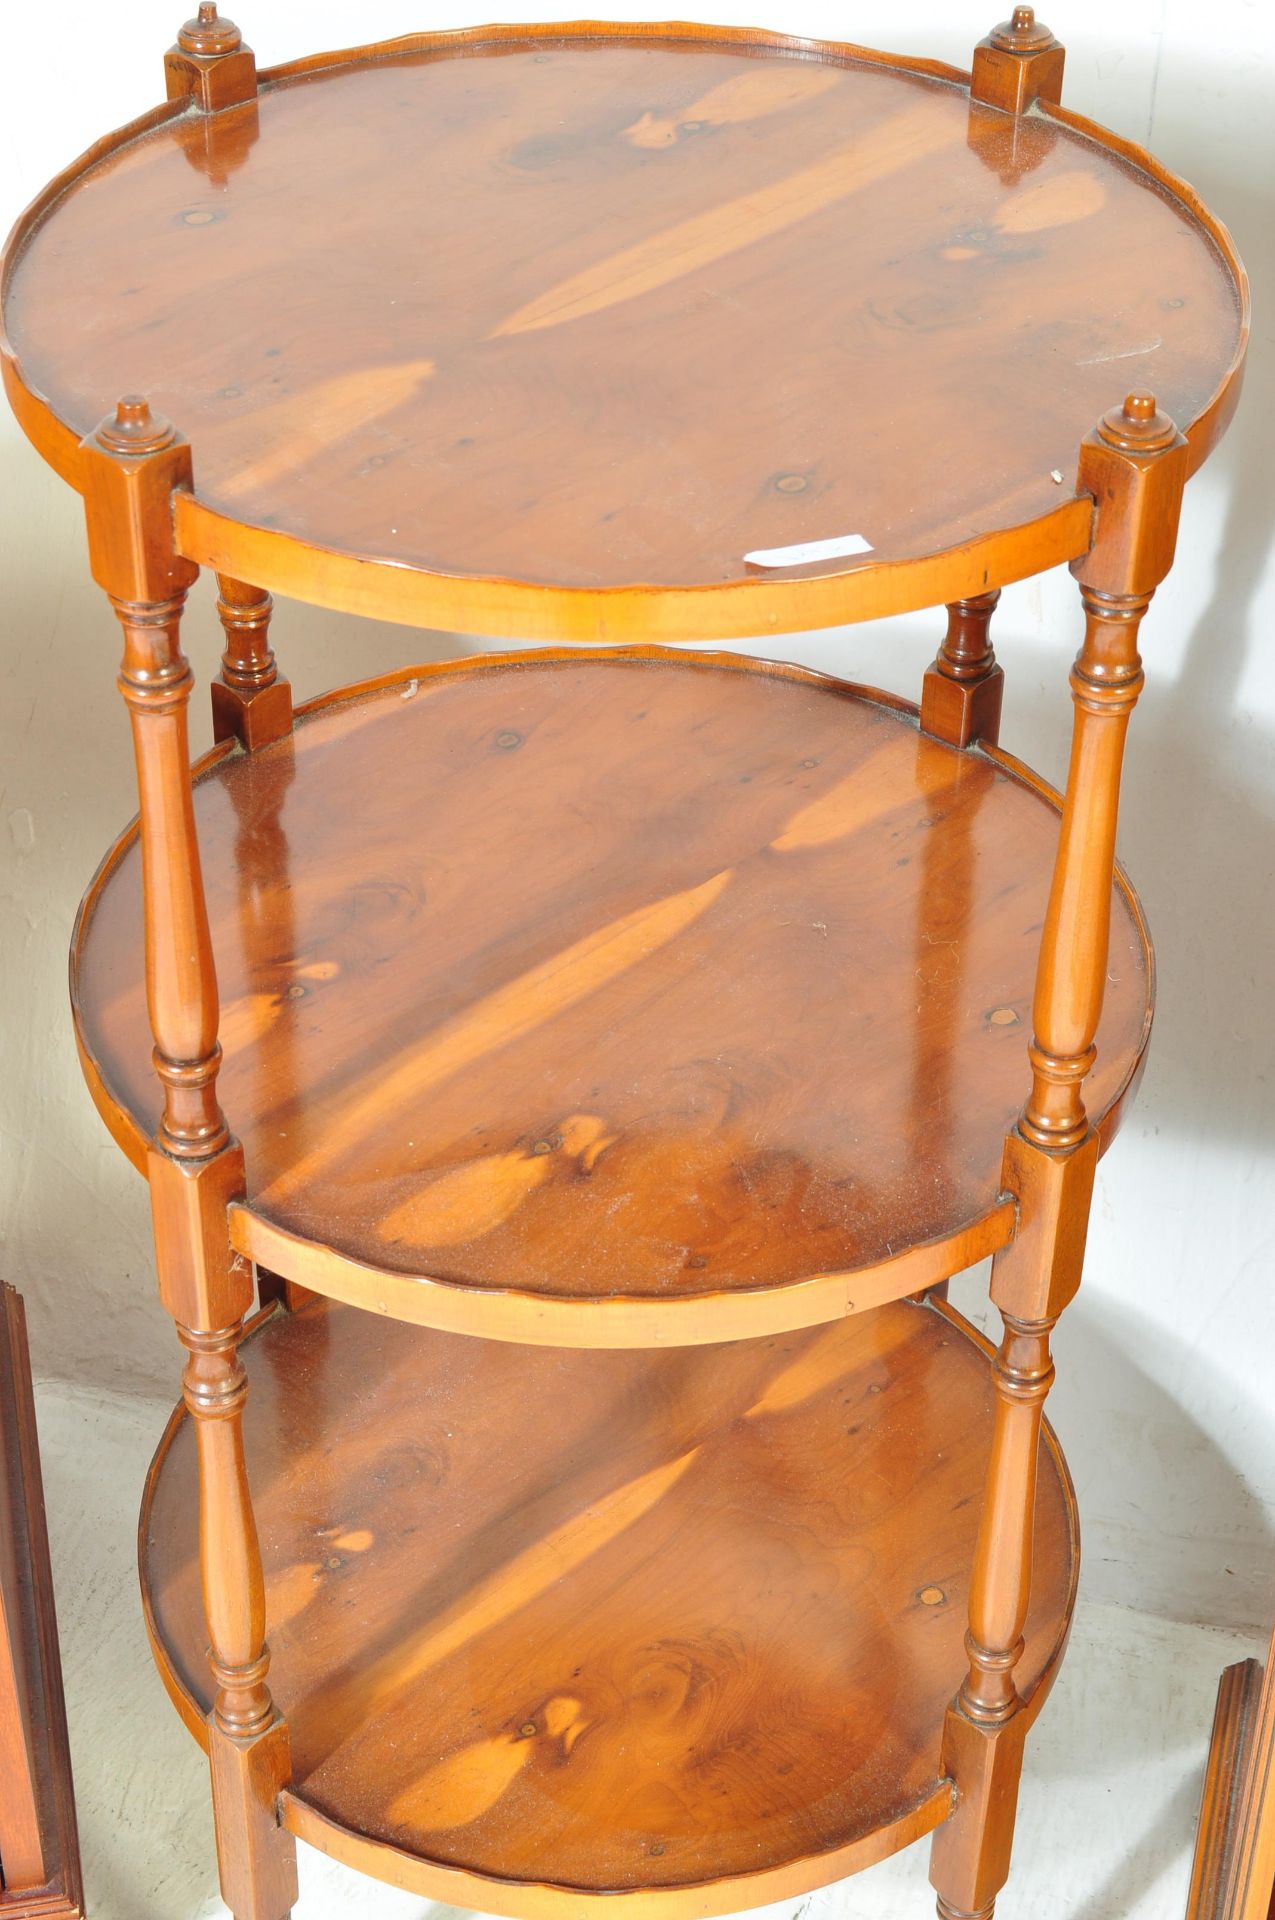 COLLECTION OF YEW WOOD REGENCY FURNITURE - Image 6 of 7